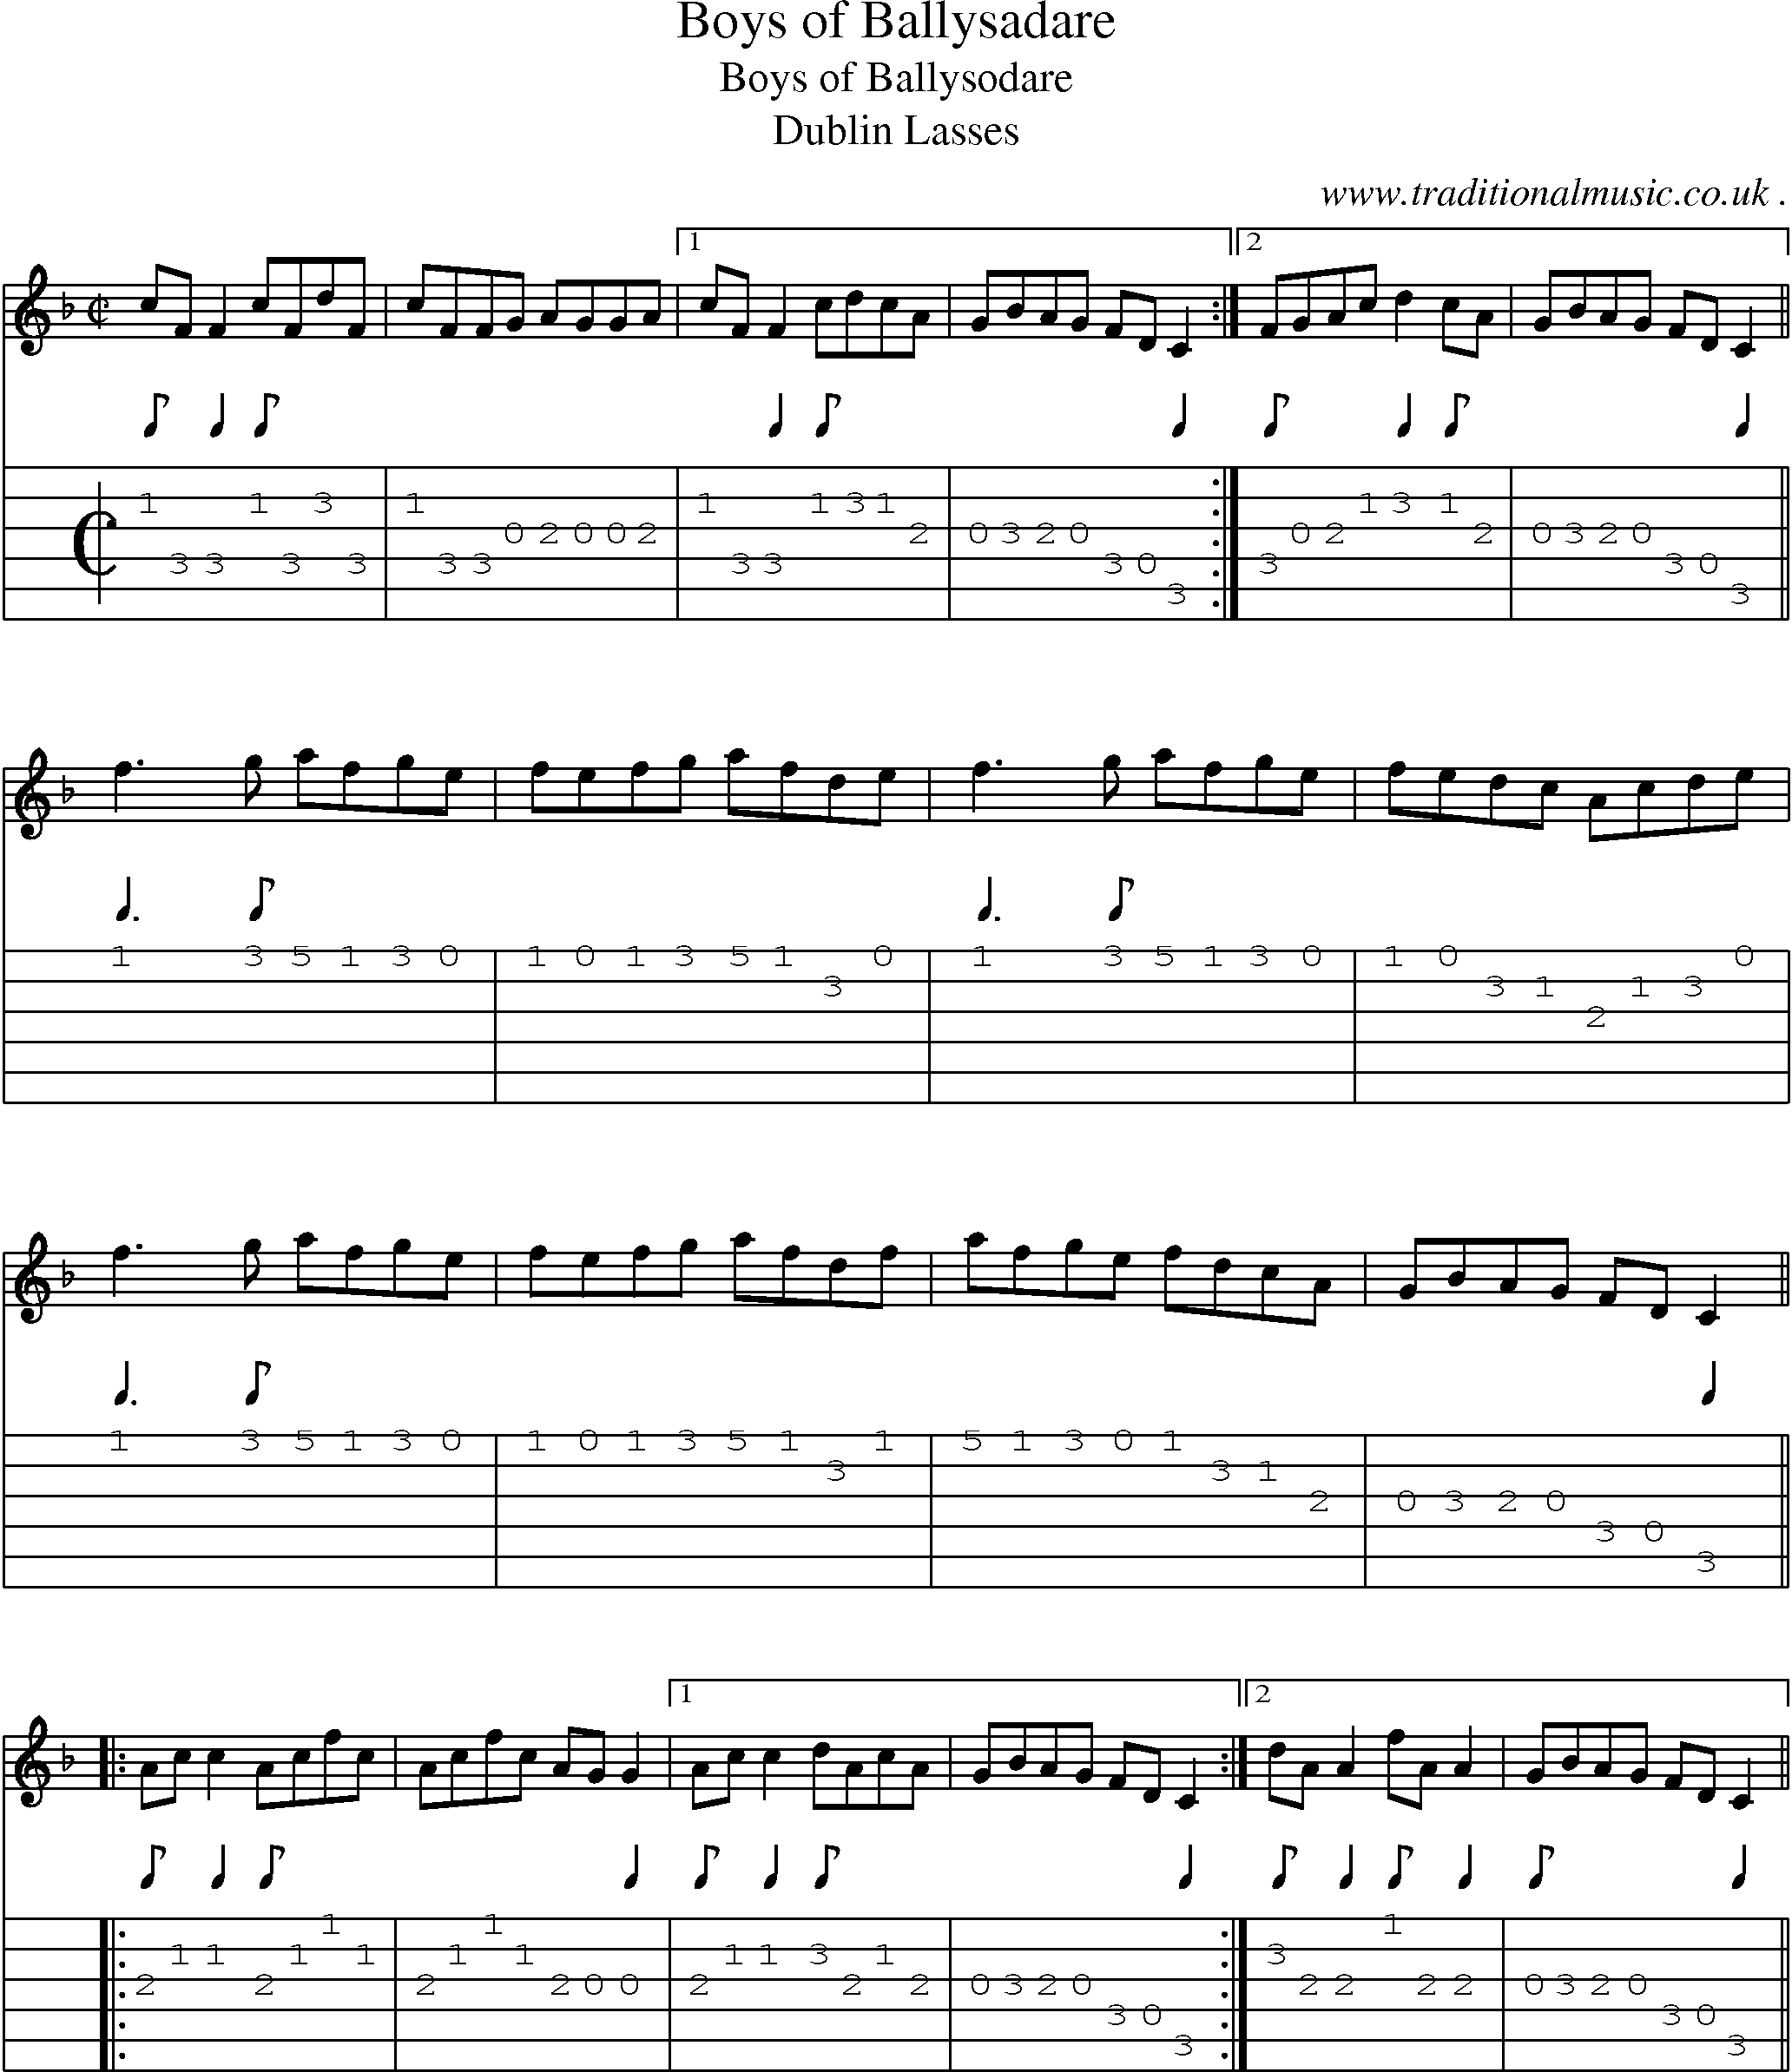 Sheet-Music and Guitar Tabs for Boys Of Ballysadare